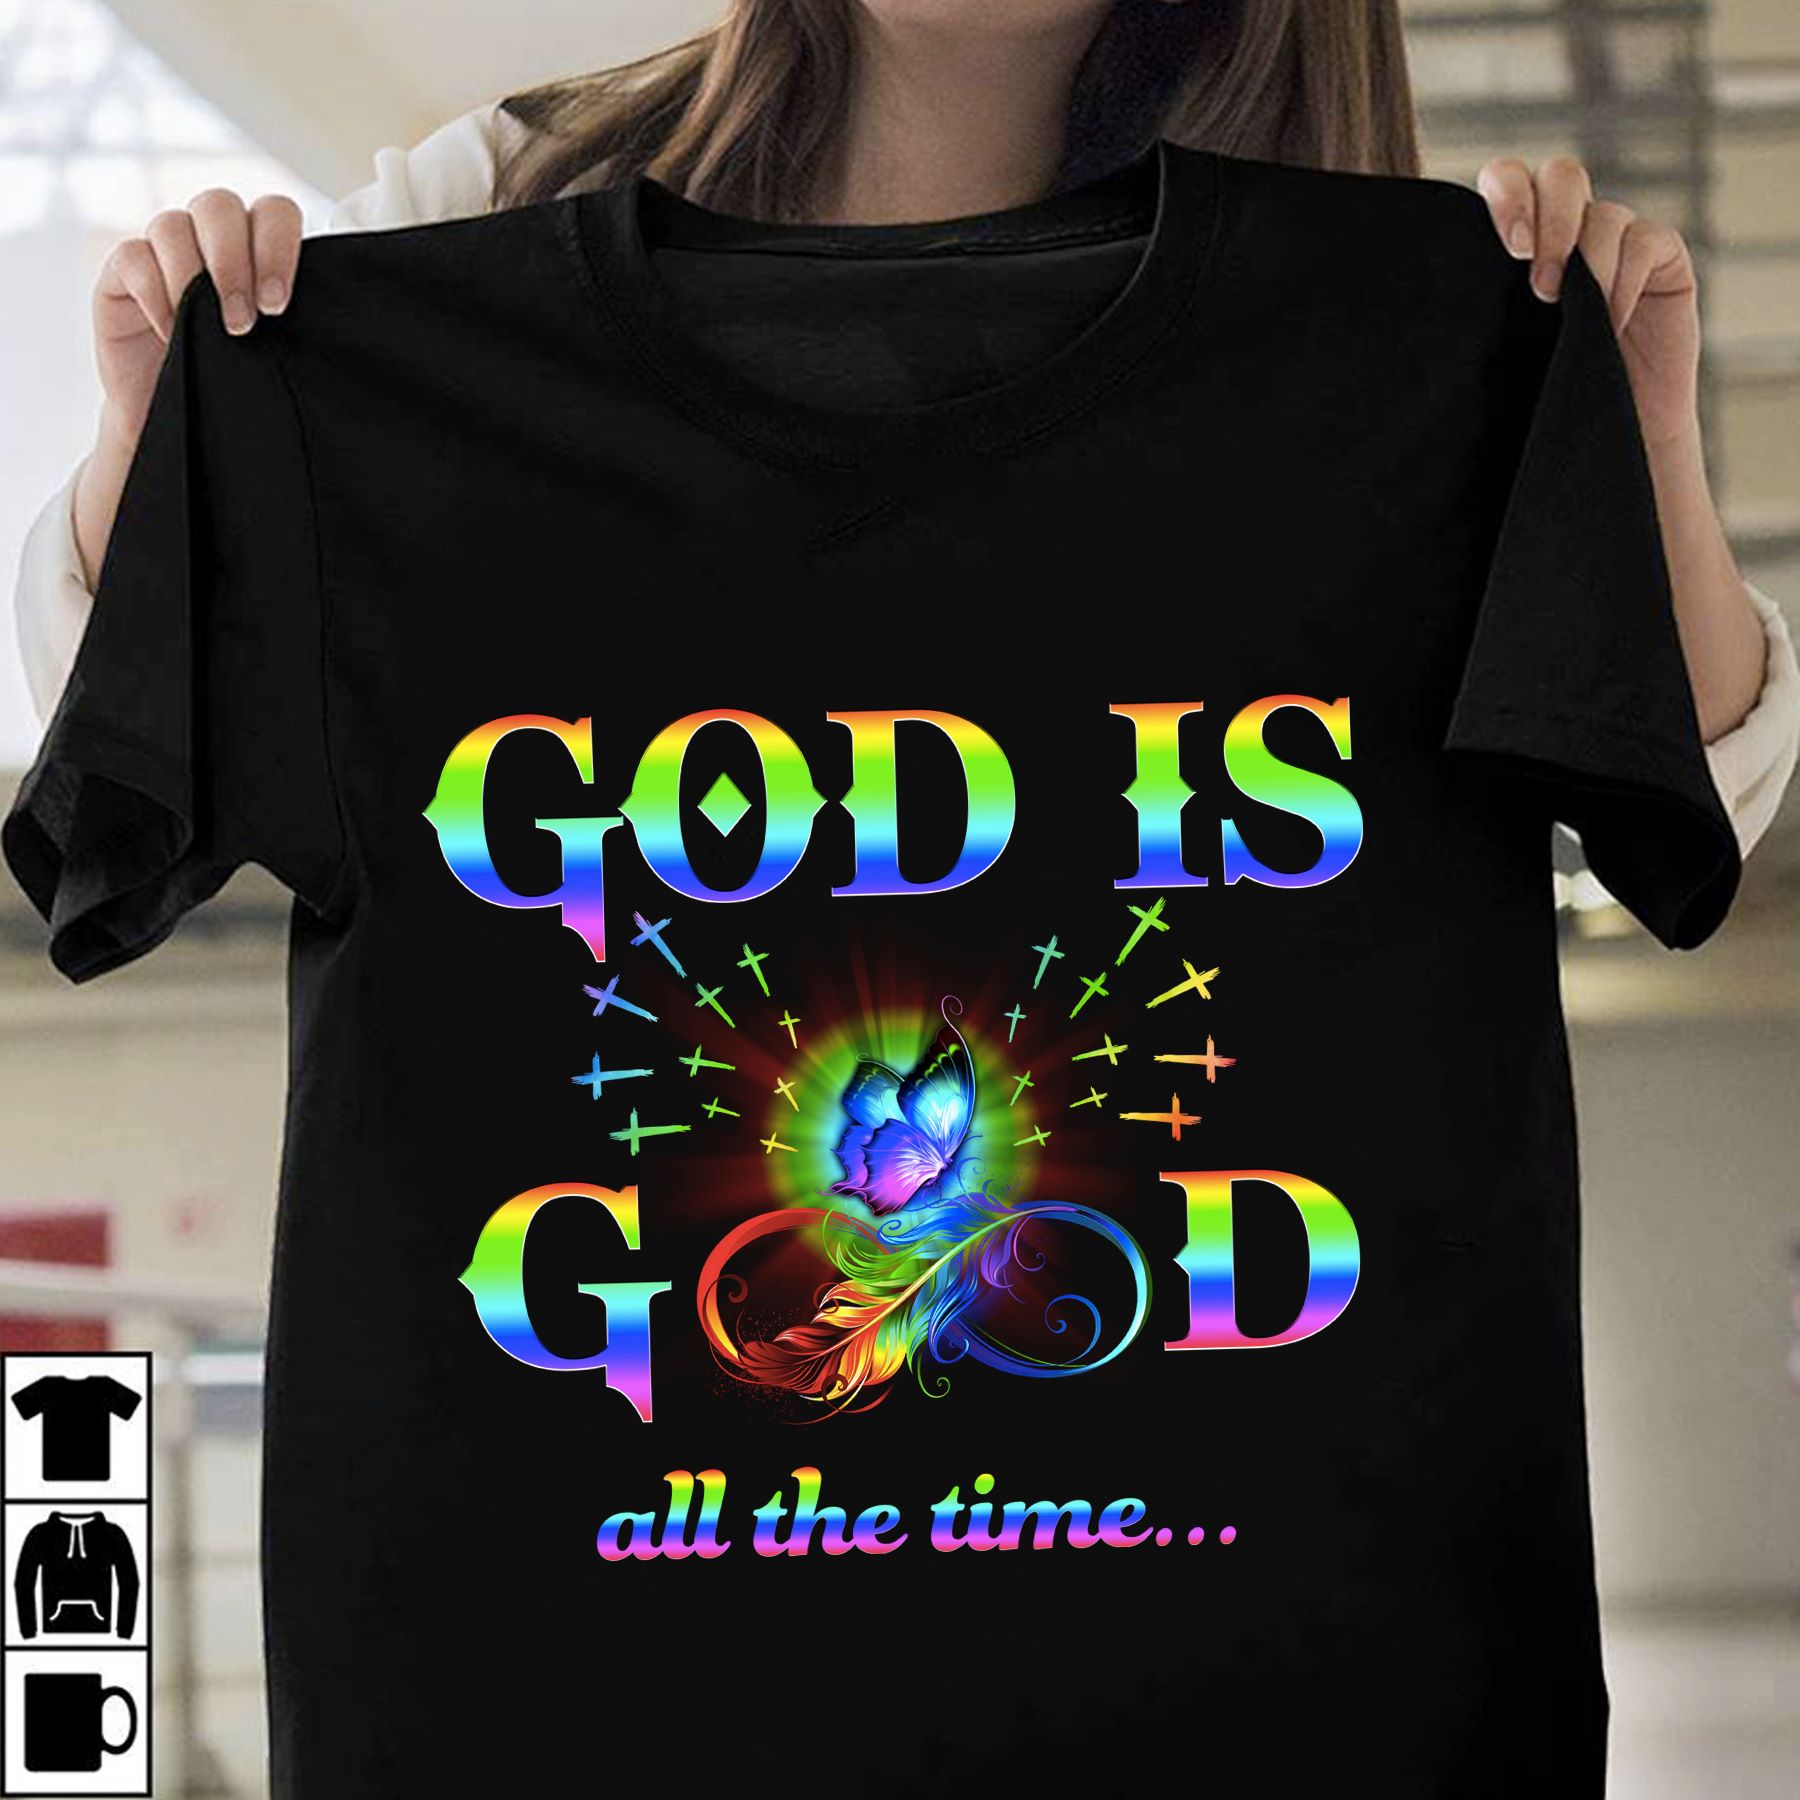 God is good all the time - Butterflies and lgbt community